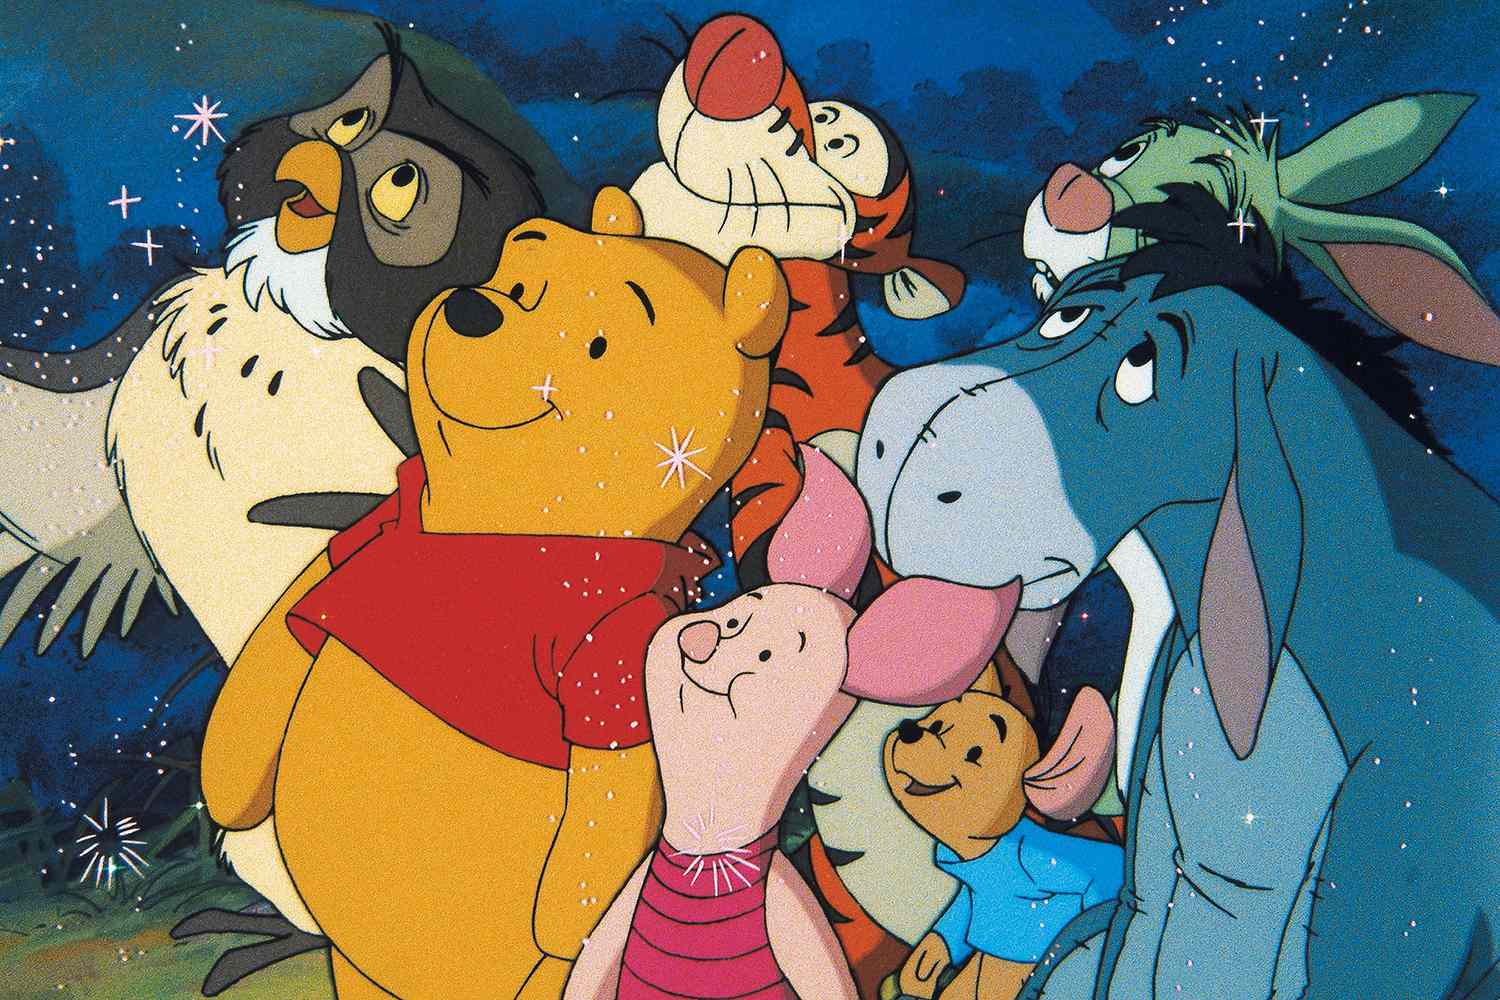 The characters of Winnie the Pooh all represent a mental disorder.
<br>
<br>
Pooh: Compulsive Eating Disorder
<br>
<br>
Tigger: ADHD
<br>
<br>
Eeyore: Major Depressive Disorder
<br>
<br>
Piglet: Generalized Anxiety disorder
<br>
<br>
Owl: Narcissistic Personality Disorder
<br>
<br>
Rabbit: OCD
<br>
<br>
Kanga: Social Anxiety
<br>
<br>
Roo: Autism
<br>
<br>
Christopher Robin: Schizophrenia (he's hallucinating all of his friends) -AnnemarieOakley